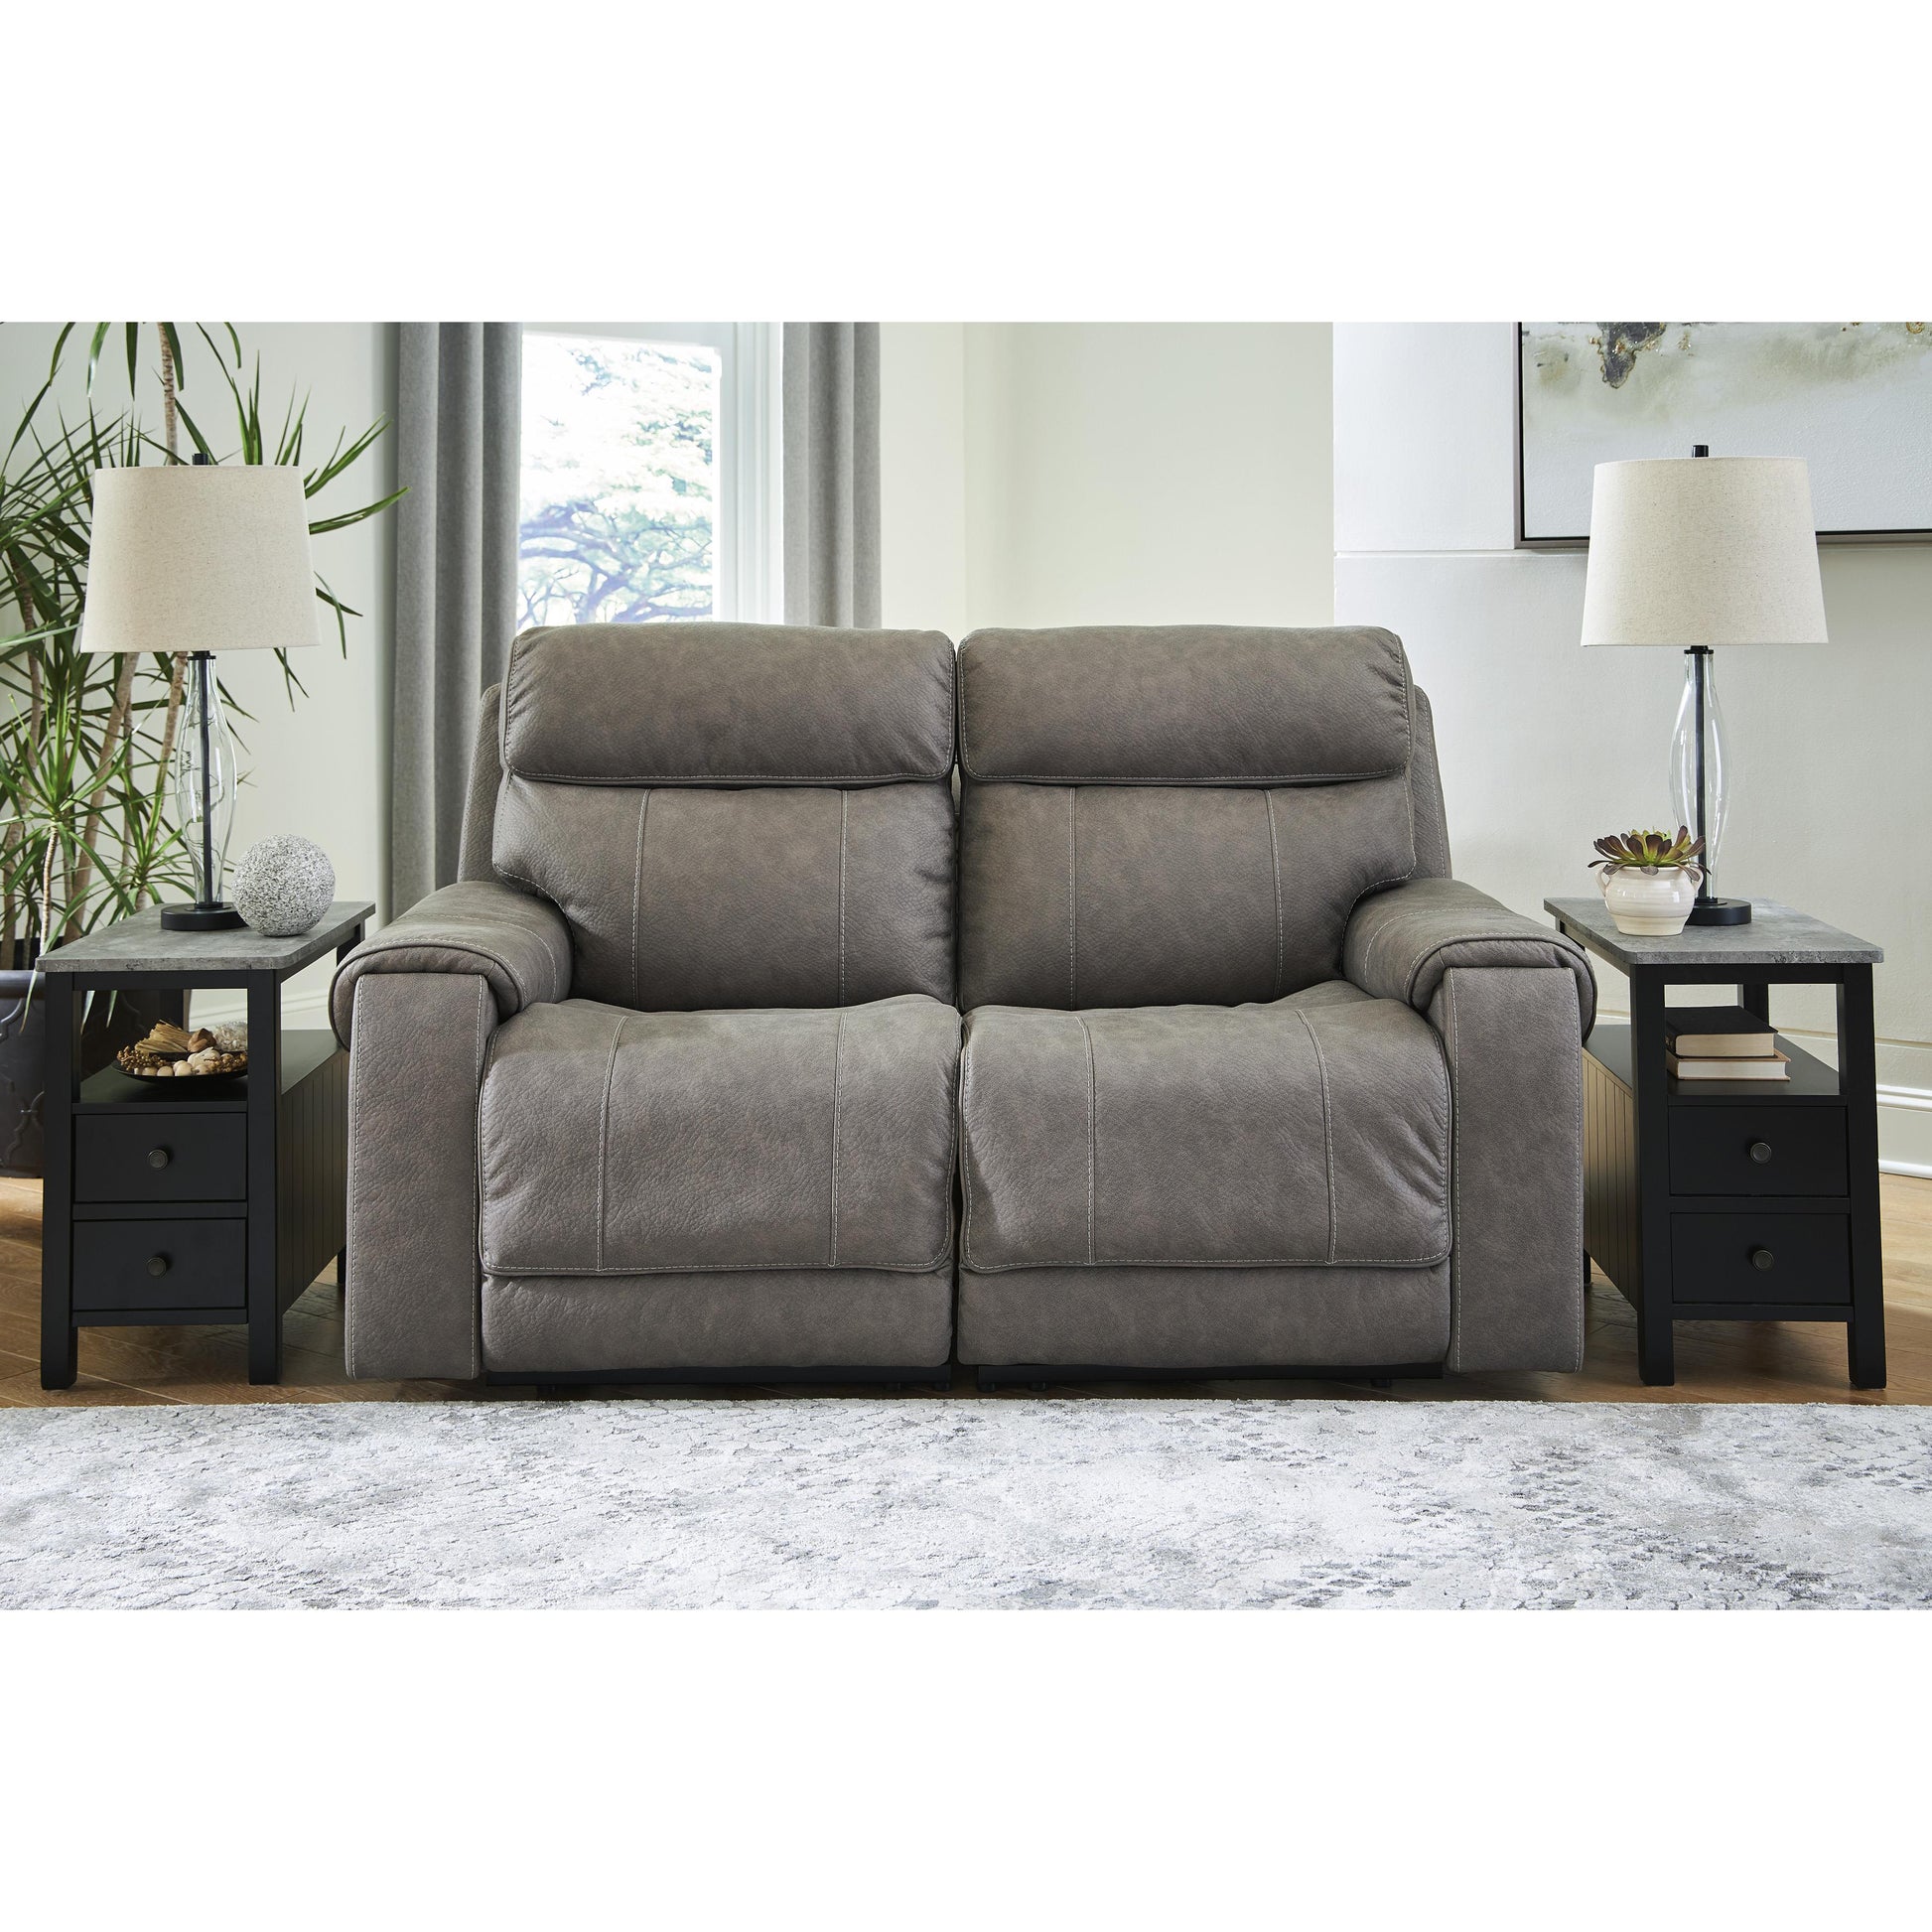 Signature Design by Ashley Starbot Power Reclining Leather Look Loveseat 2350158/2350162 IMAGE 2